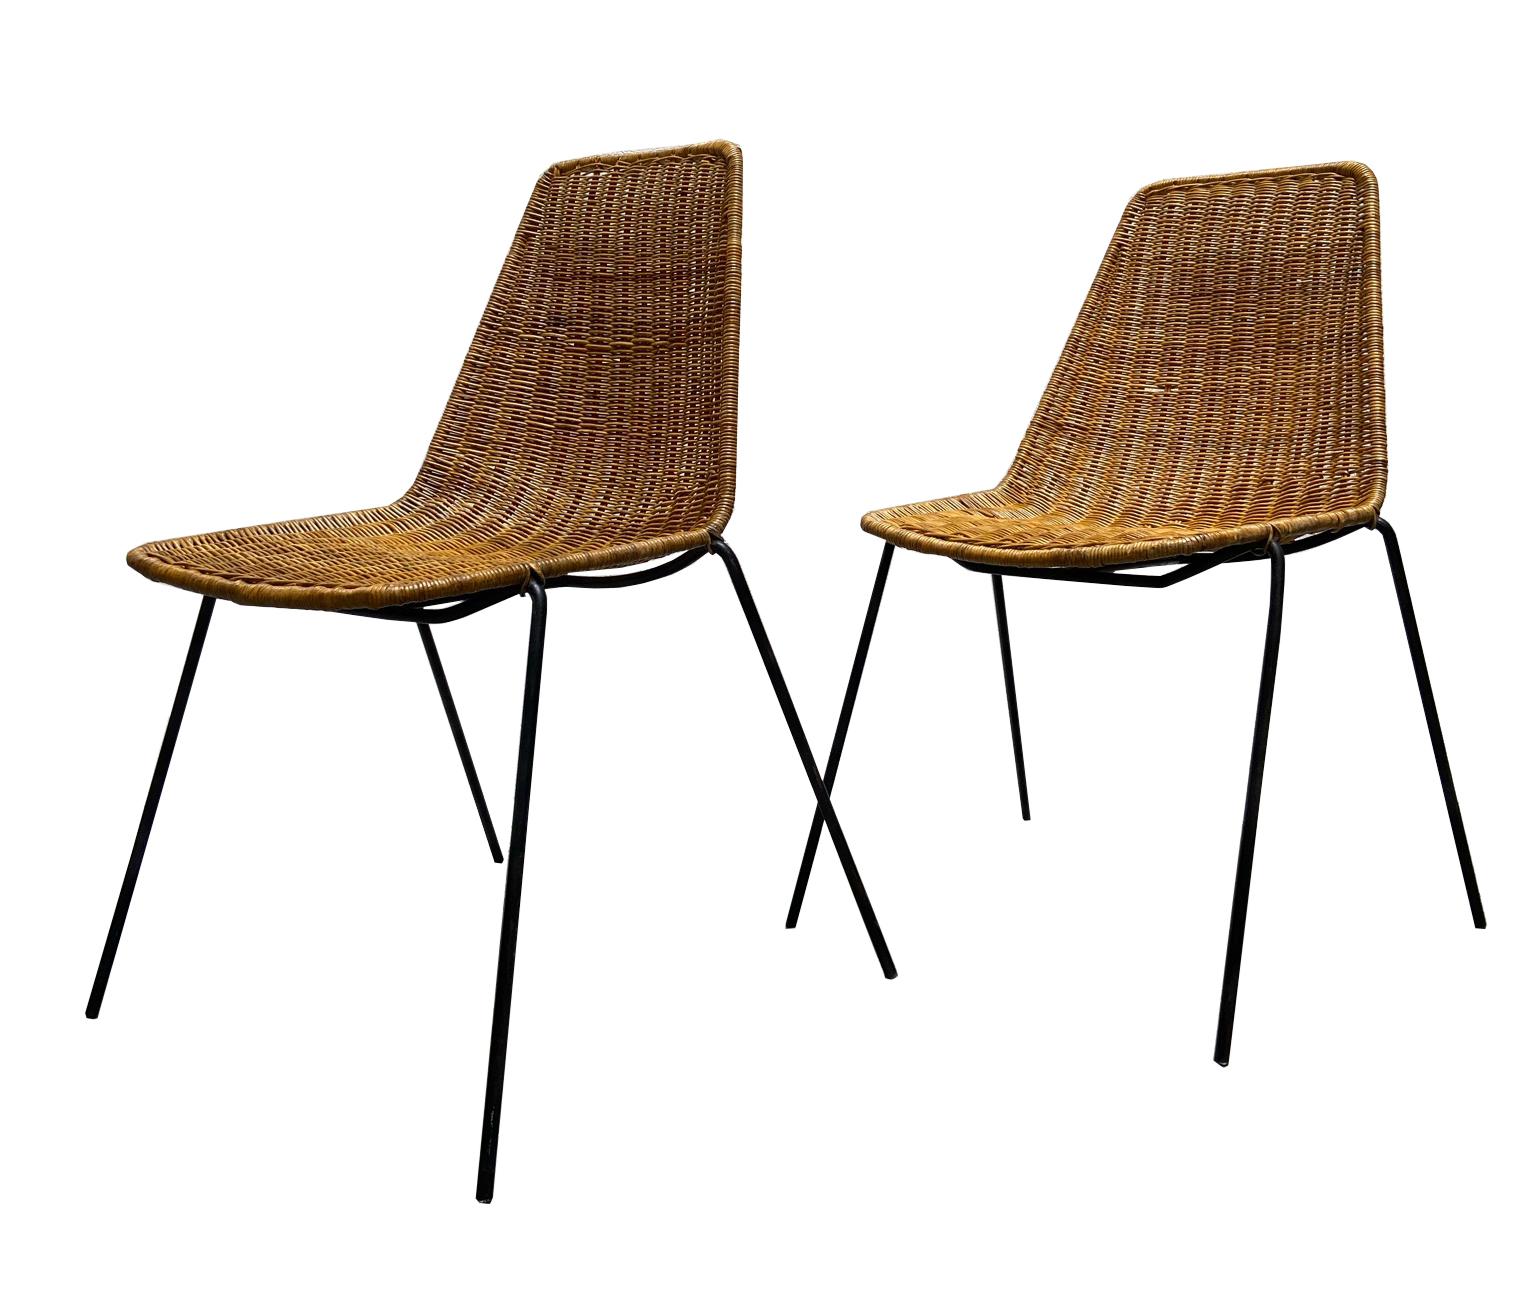 Set of two Mid-Century Modern rattan chairs designed by Swiss designer Gian Franco Legler 1951. 
The rattan chairs have a black enameled metal frame. 
The seat shell was made of wicker. 
Very good condition.